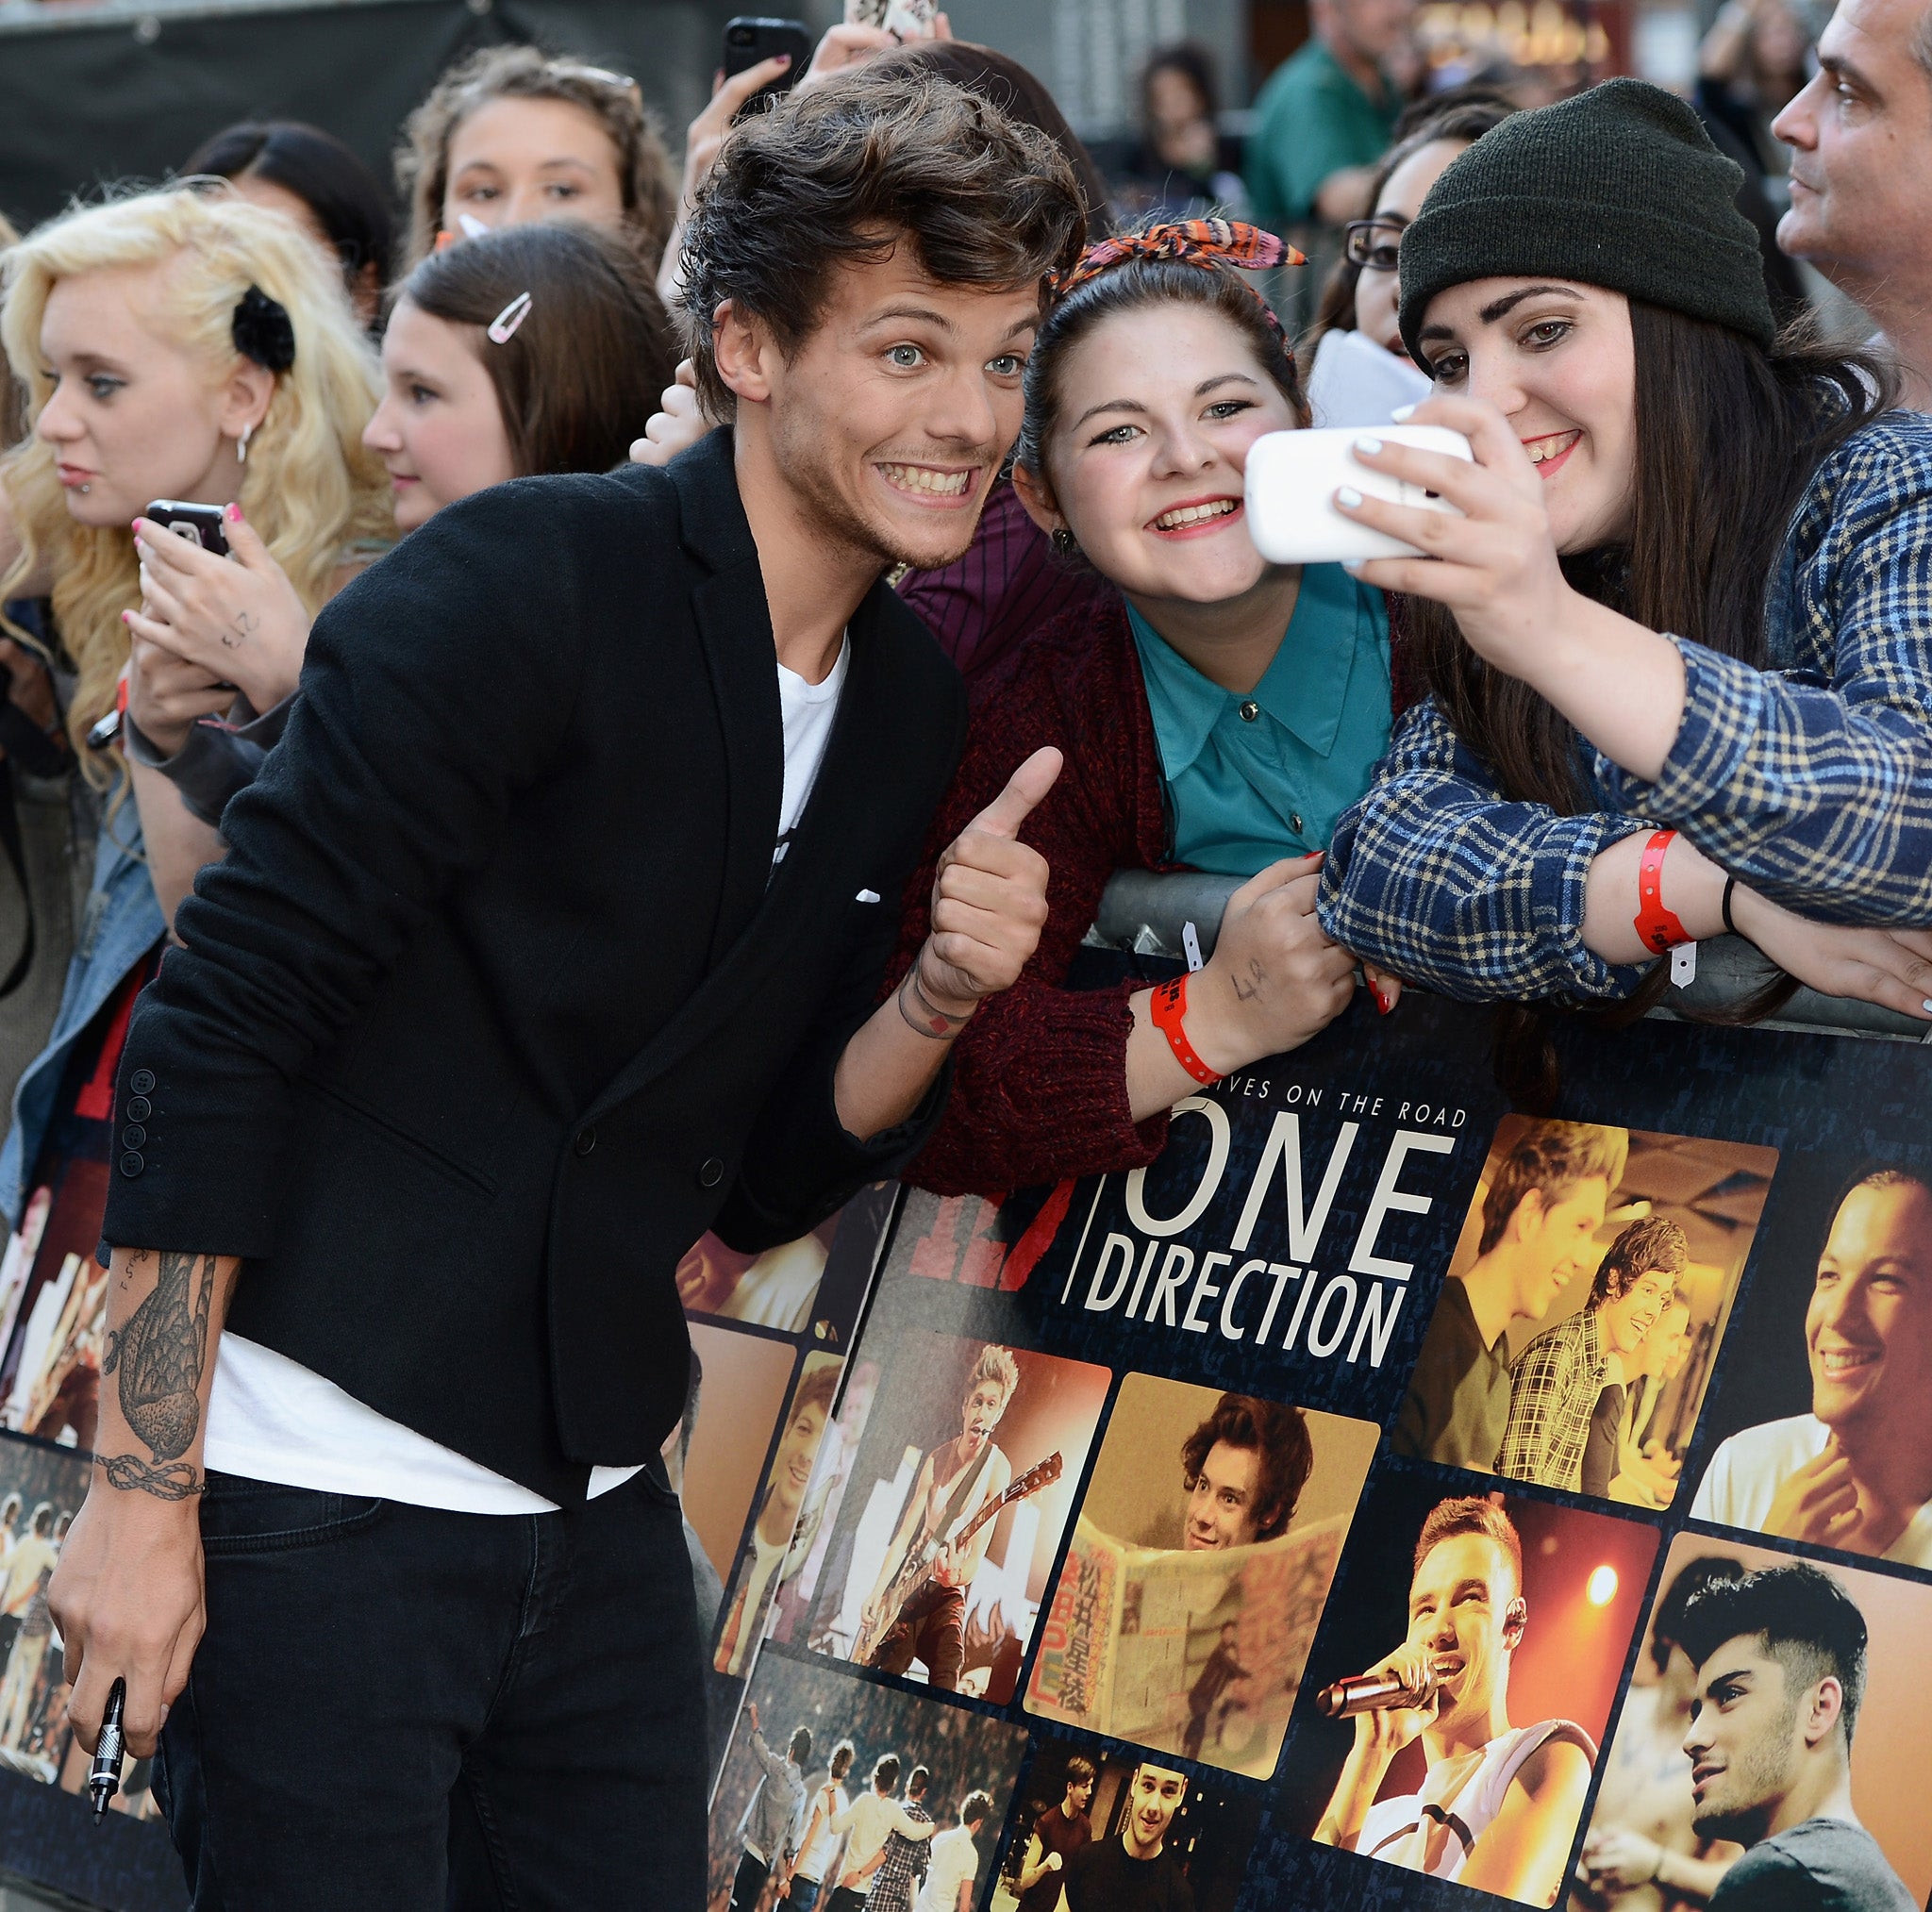 Singer Louis Tomlinson from One Direction attends the 'One Direction This Is Us' world premiere